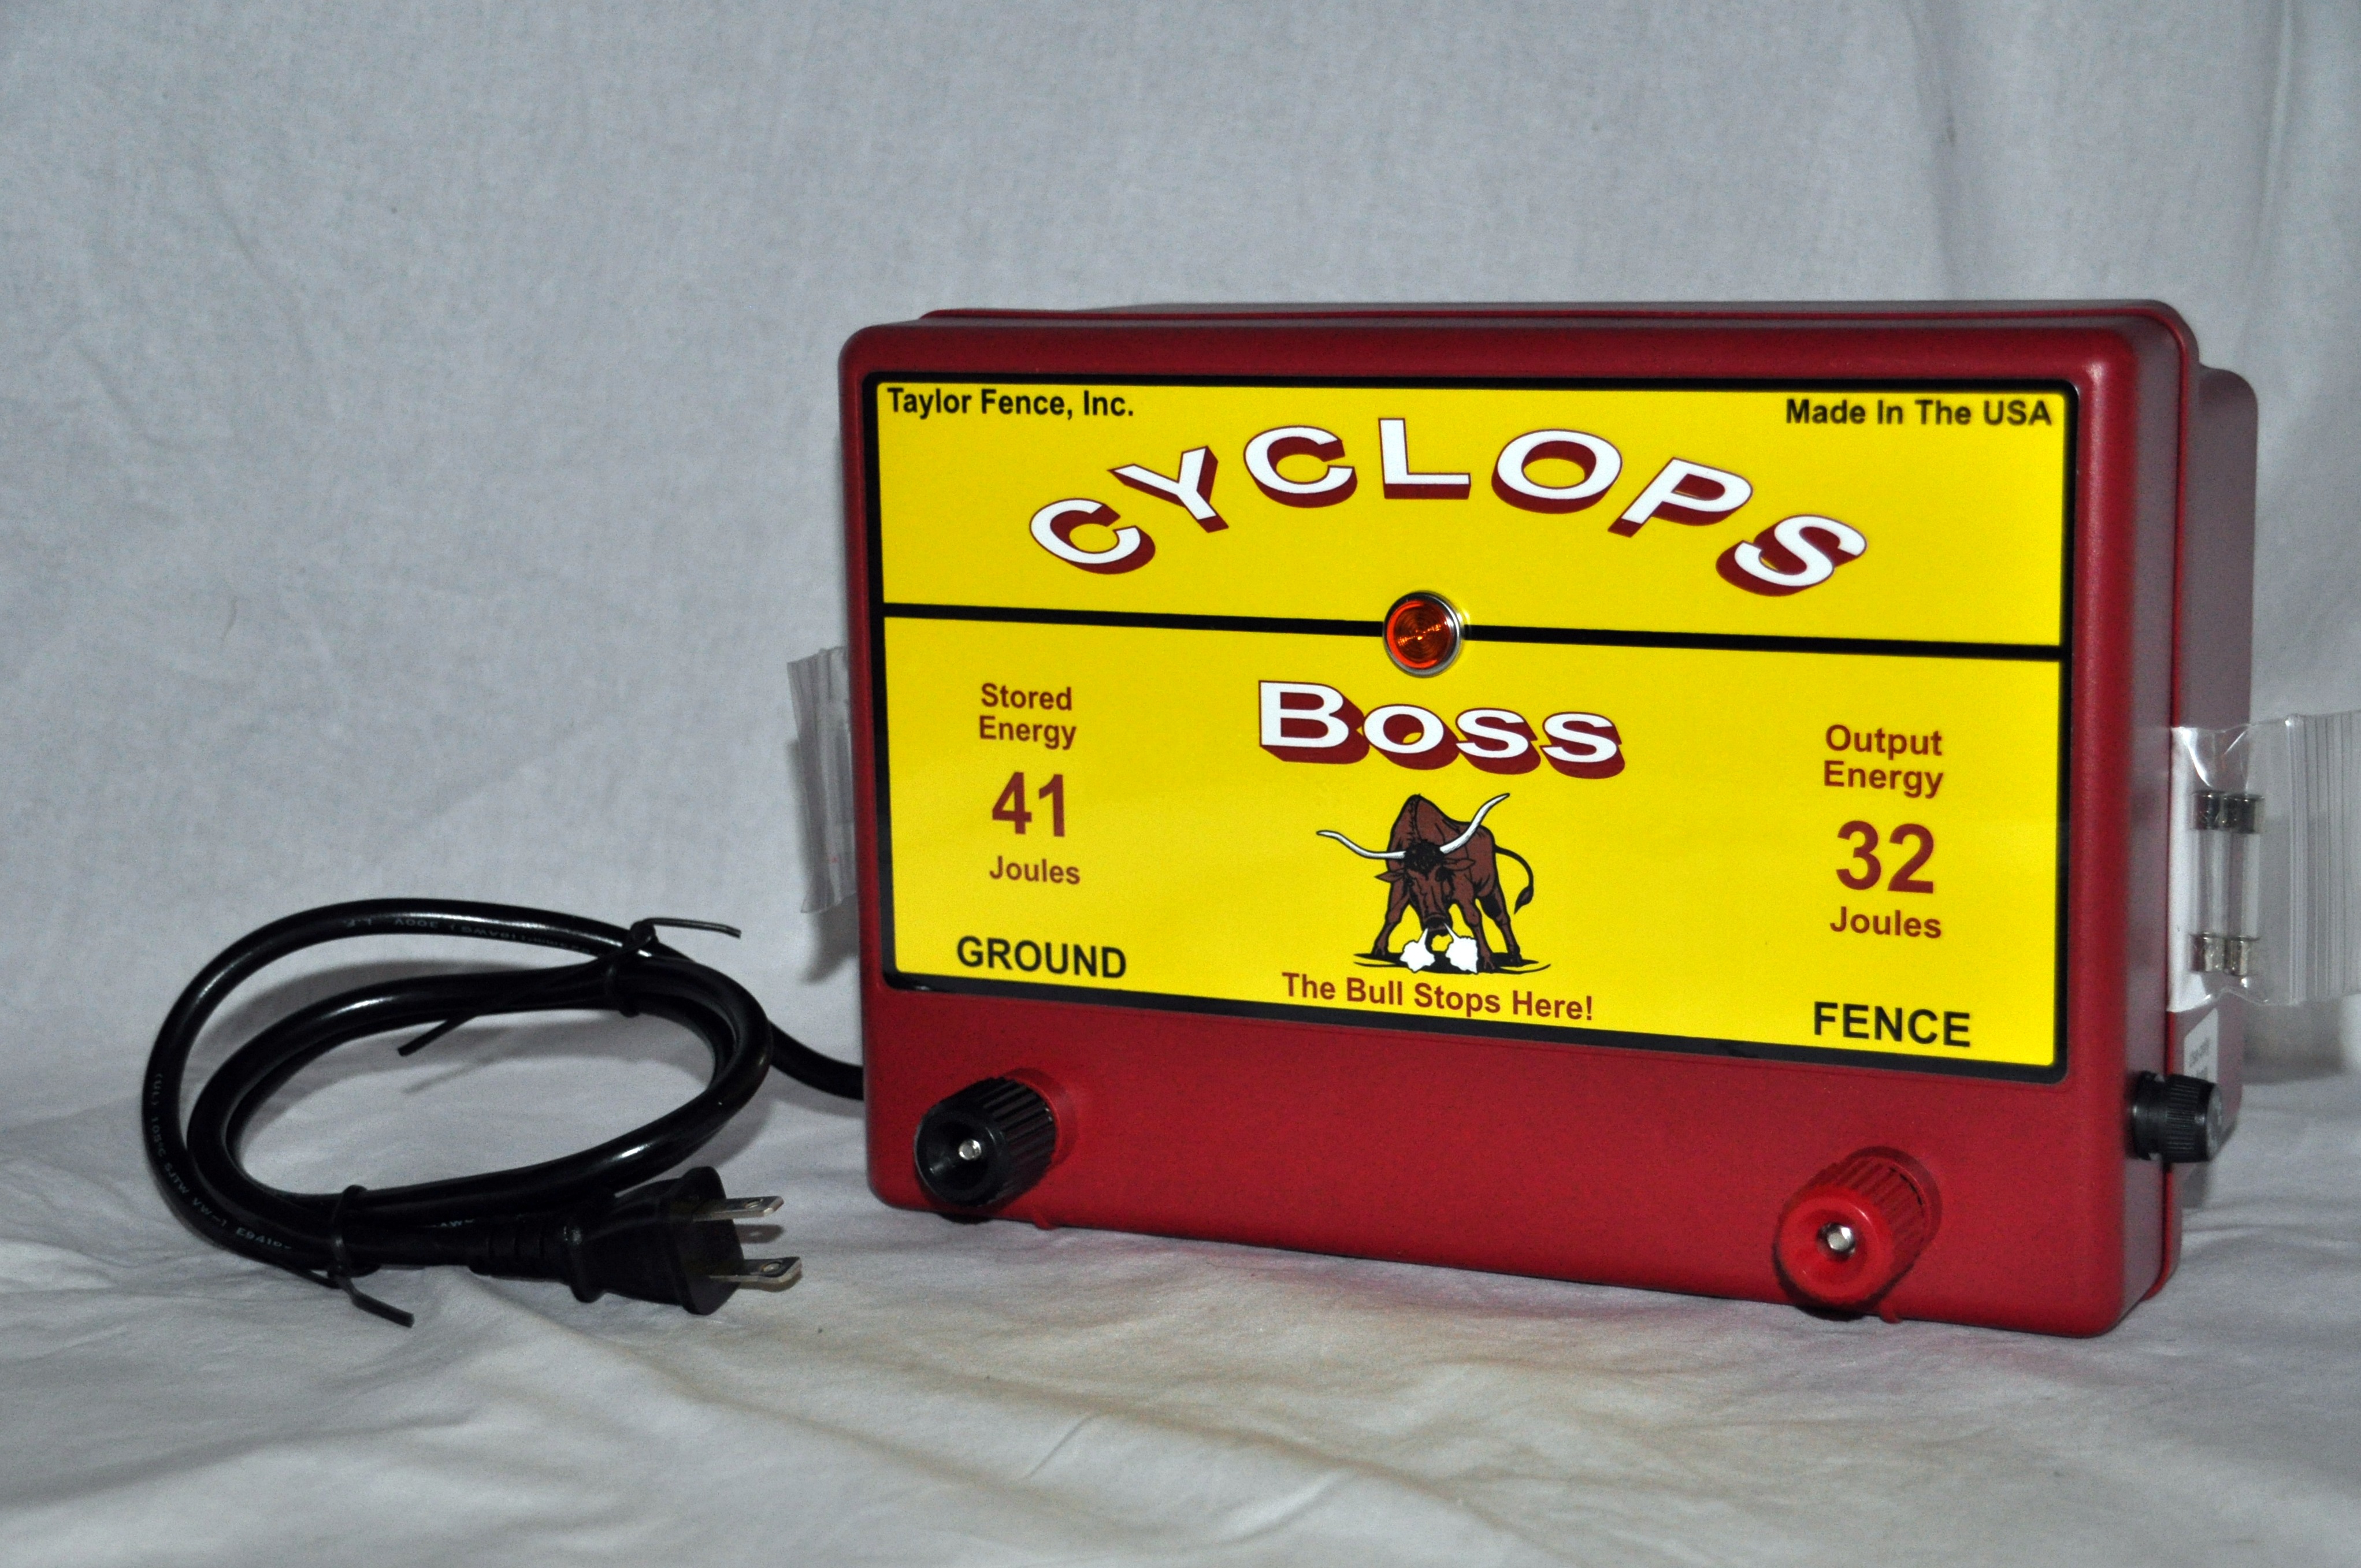 Cyclops BOSS Electric Fence Charger